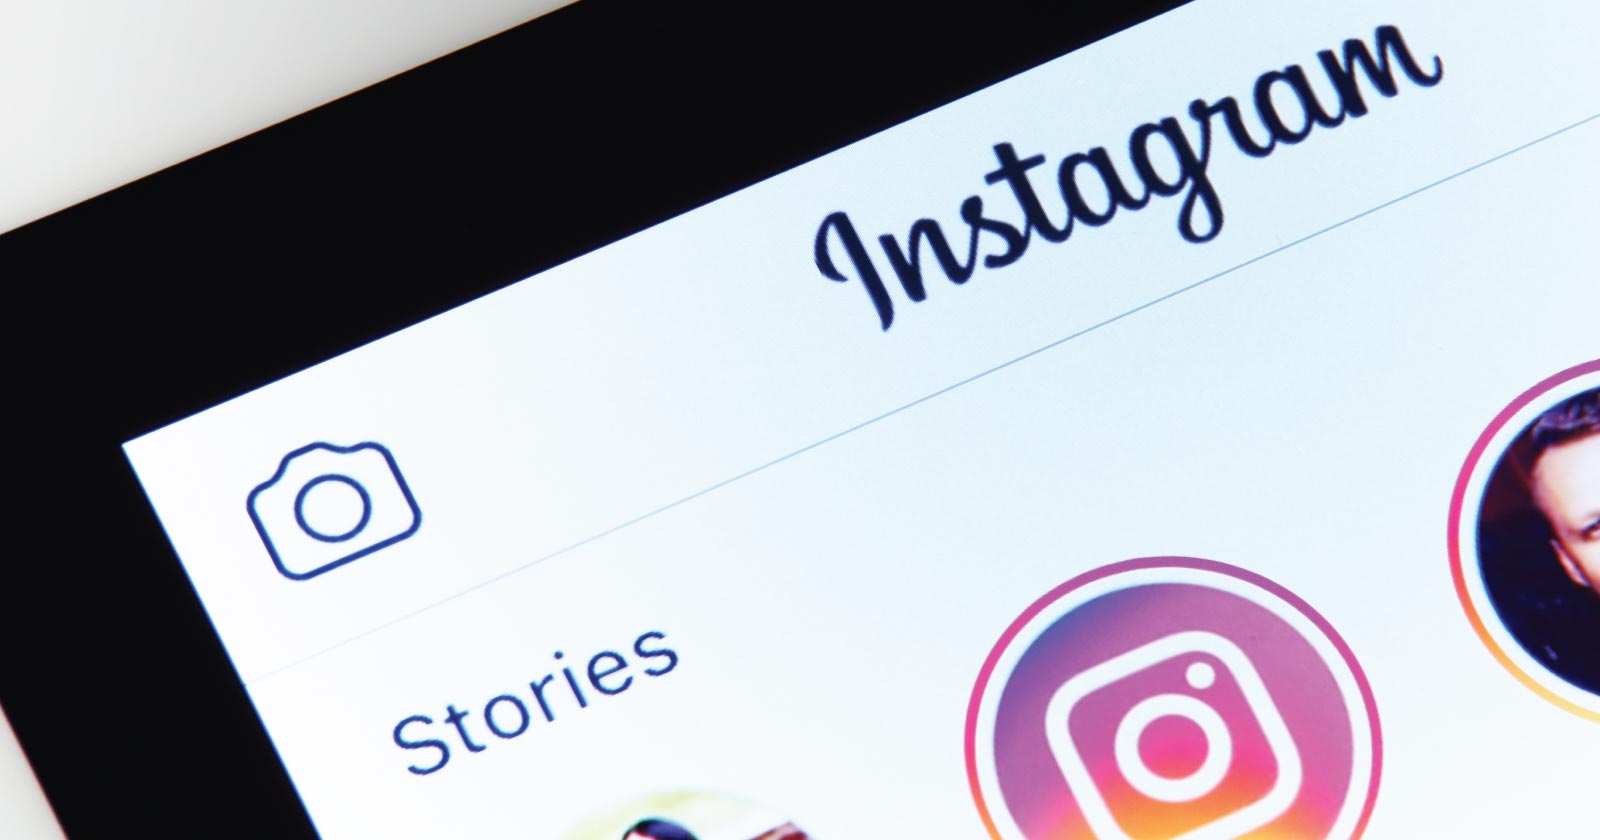 7 Steps For Getting More Followers On Instagram (without Ads)